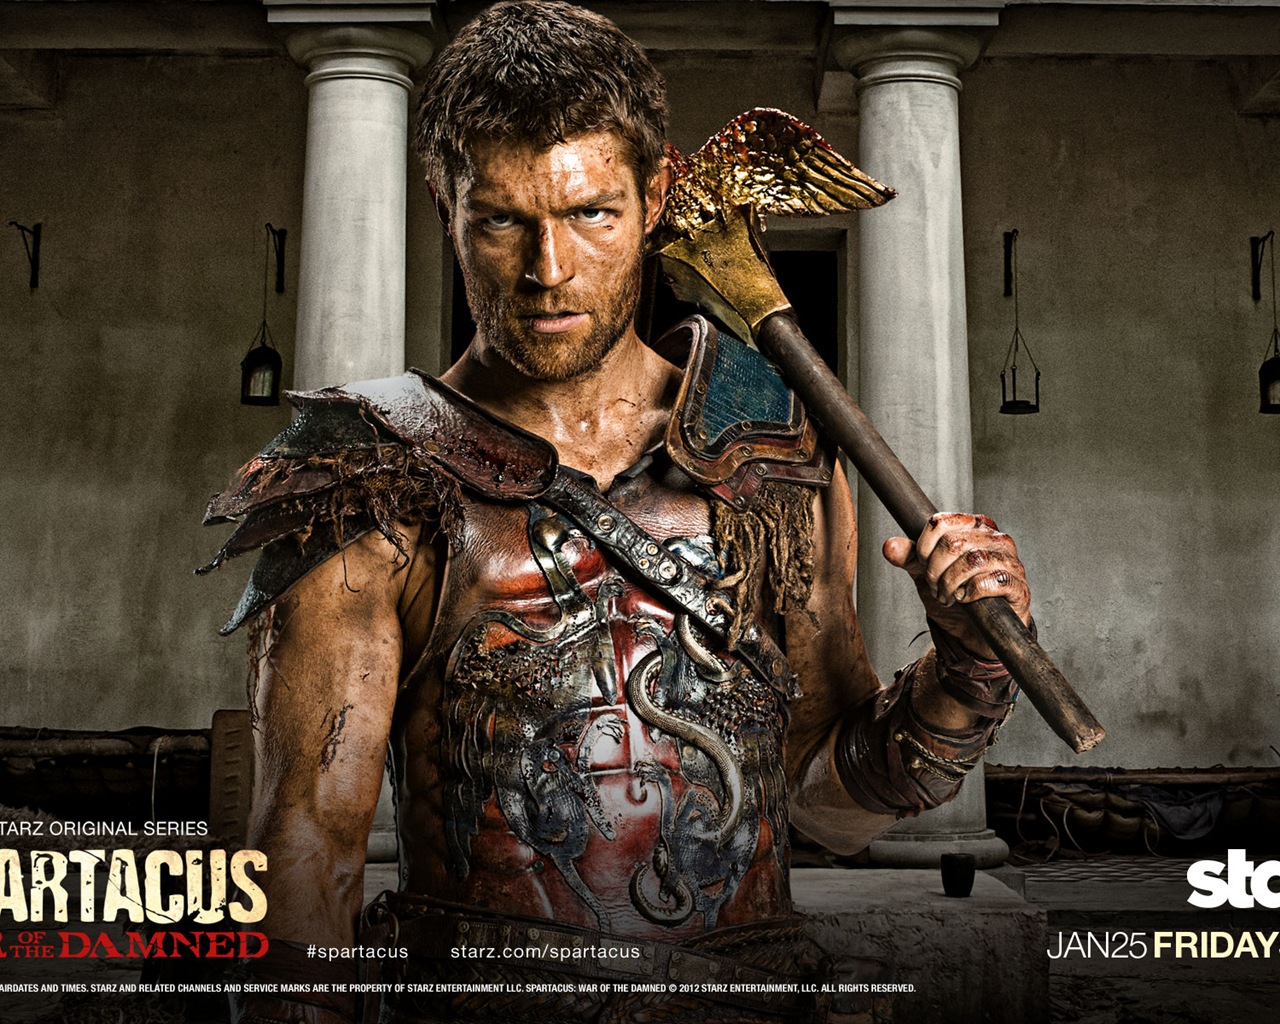 Spartacus: War of the Damned HD Wallpaper #13 - 1280x1024